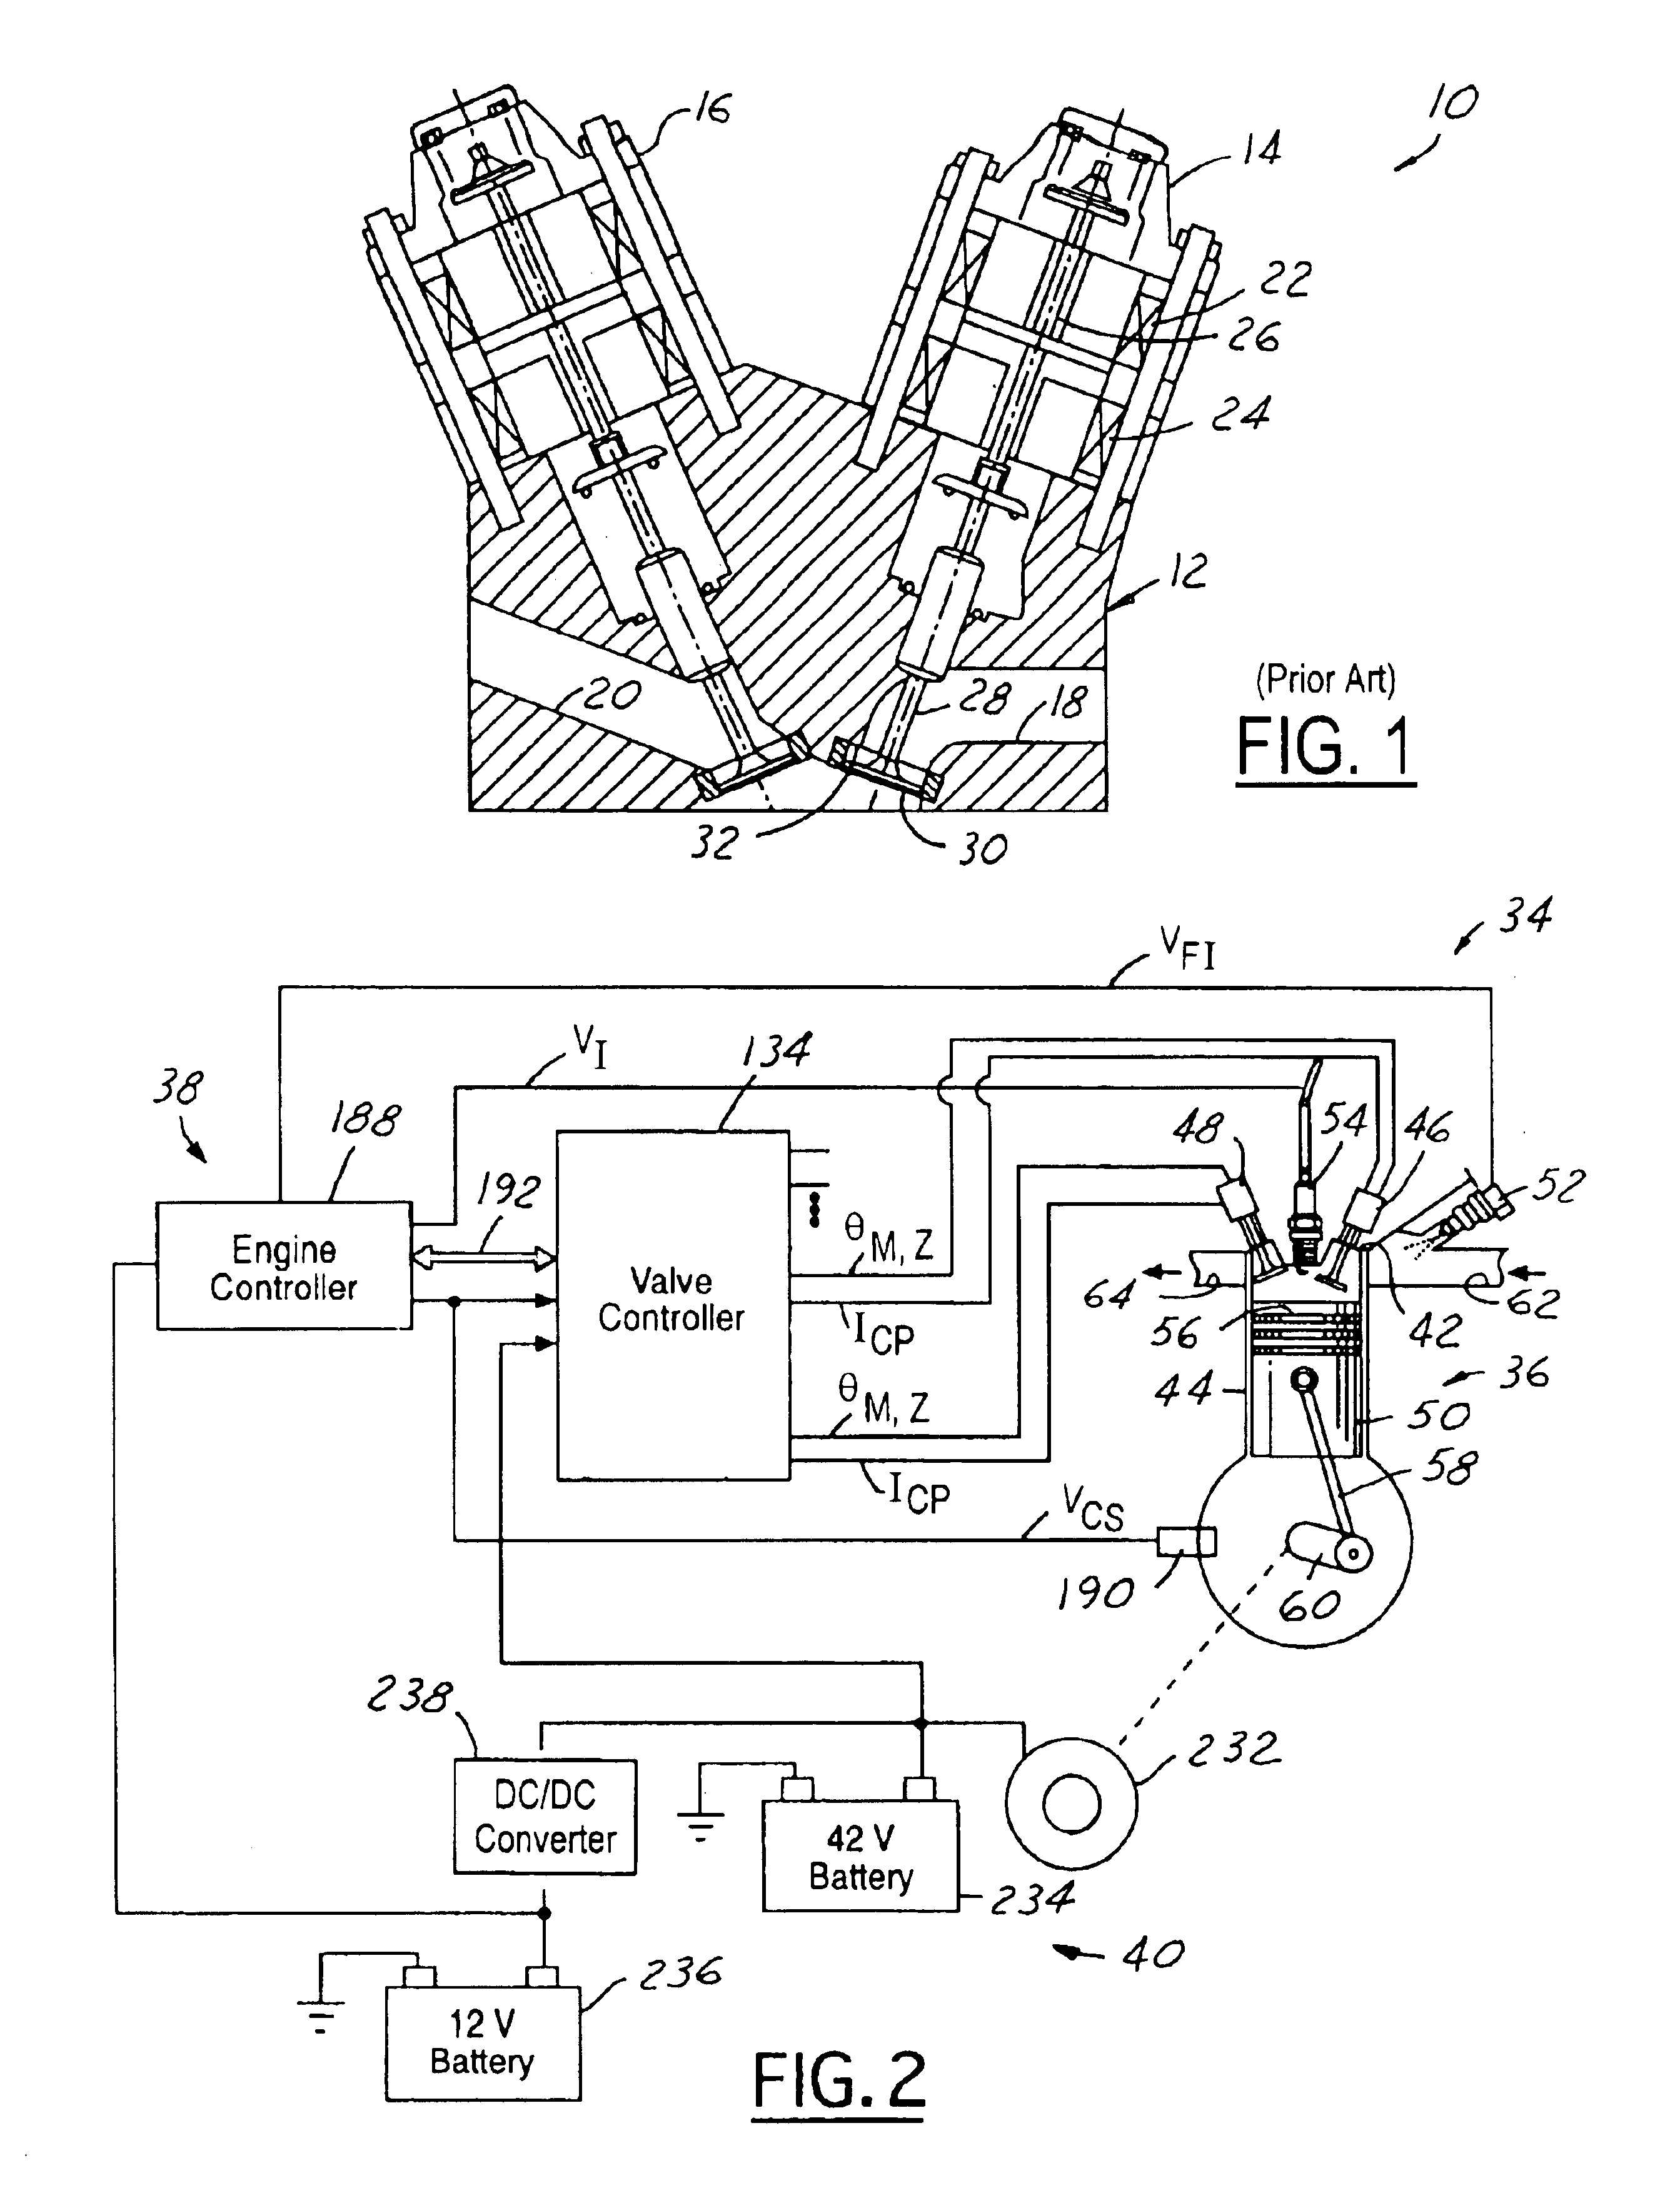 Electromechanical valve assembly for an internal combustion engine